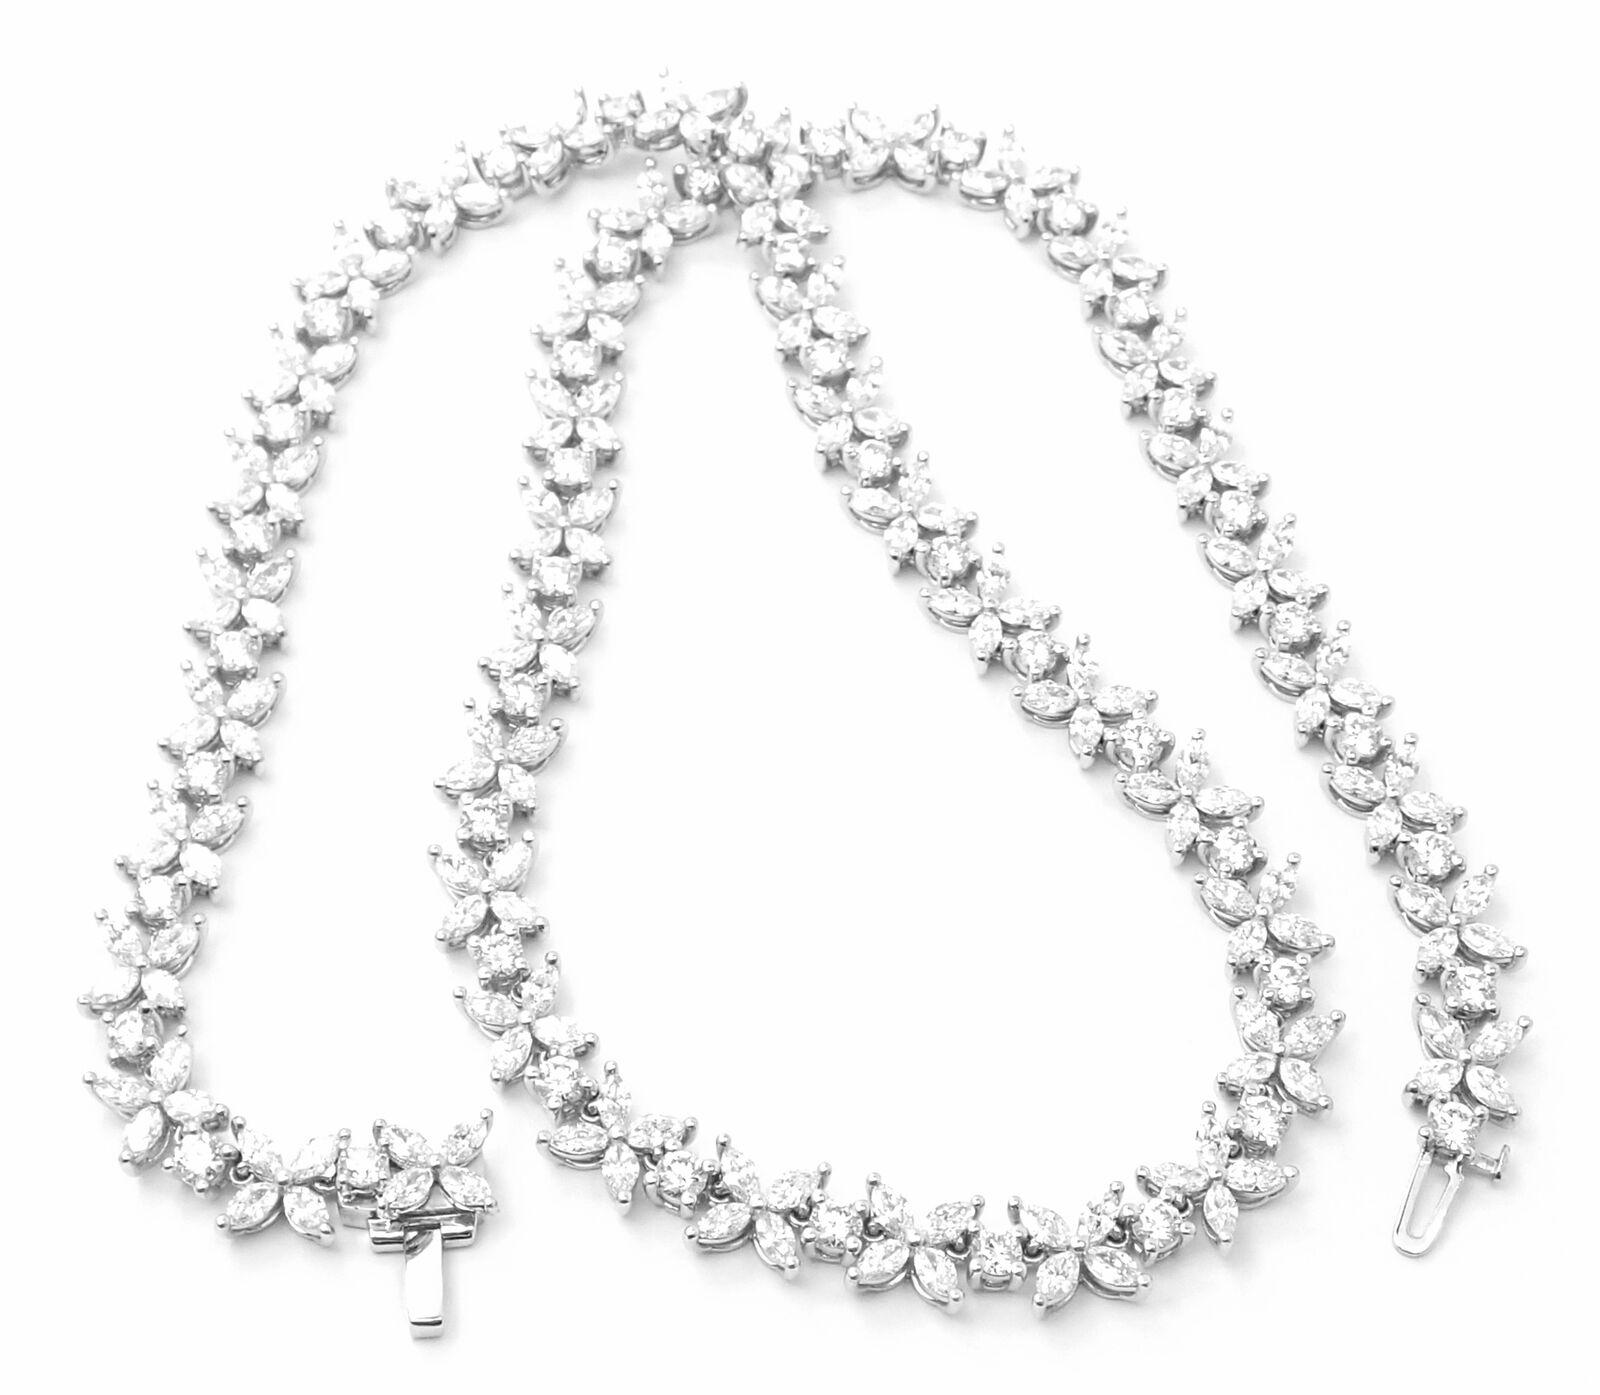 Platinum Diamond Victoria Alternating Graduated Necklace by Tiffany & Co. 
With 146 Round brilliant cut diamonds VS1 clarity, G color total weight approx. 5.52ct
224 Marque diamonds VS1 clarity, G color total weight approx. 7.20ct
This necklace